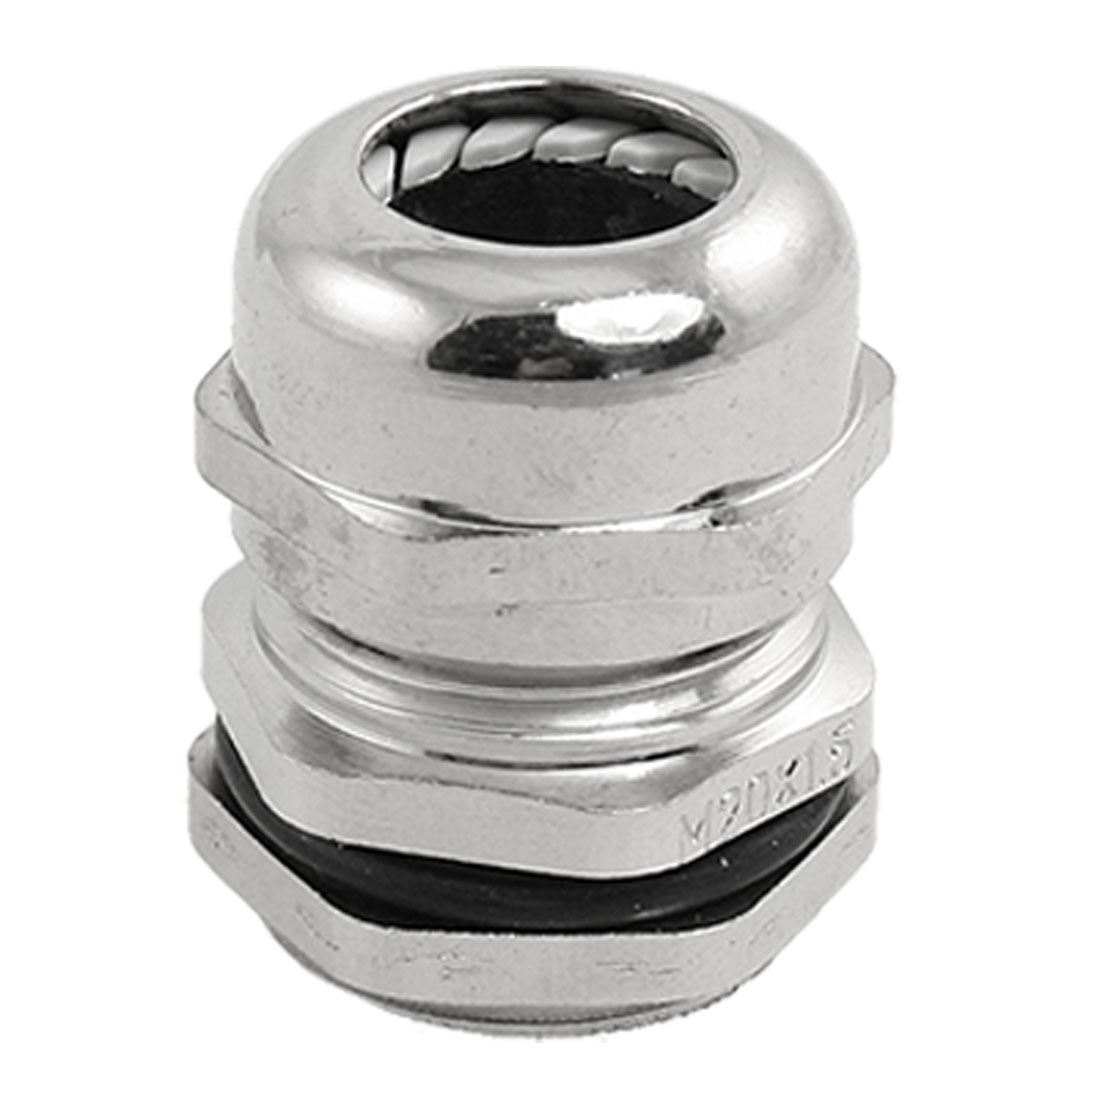 uxcell Uxcell Waterproof Stainless Steel 6-11mm M20 x 1.5 Cable Gland Connector